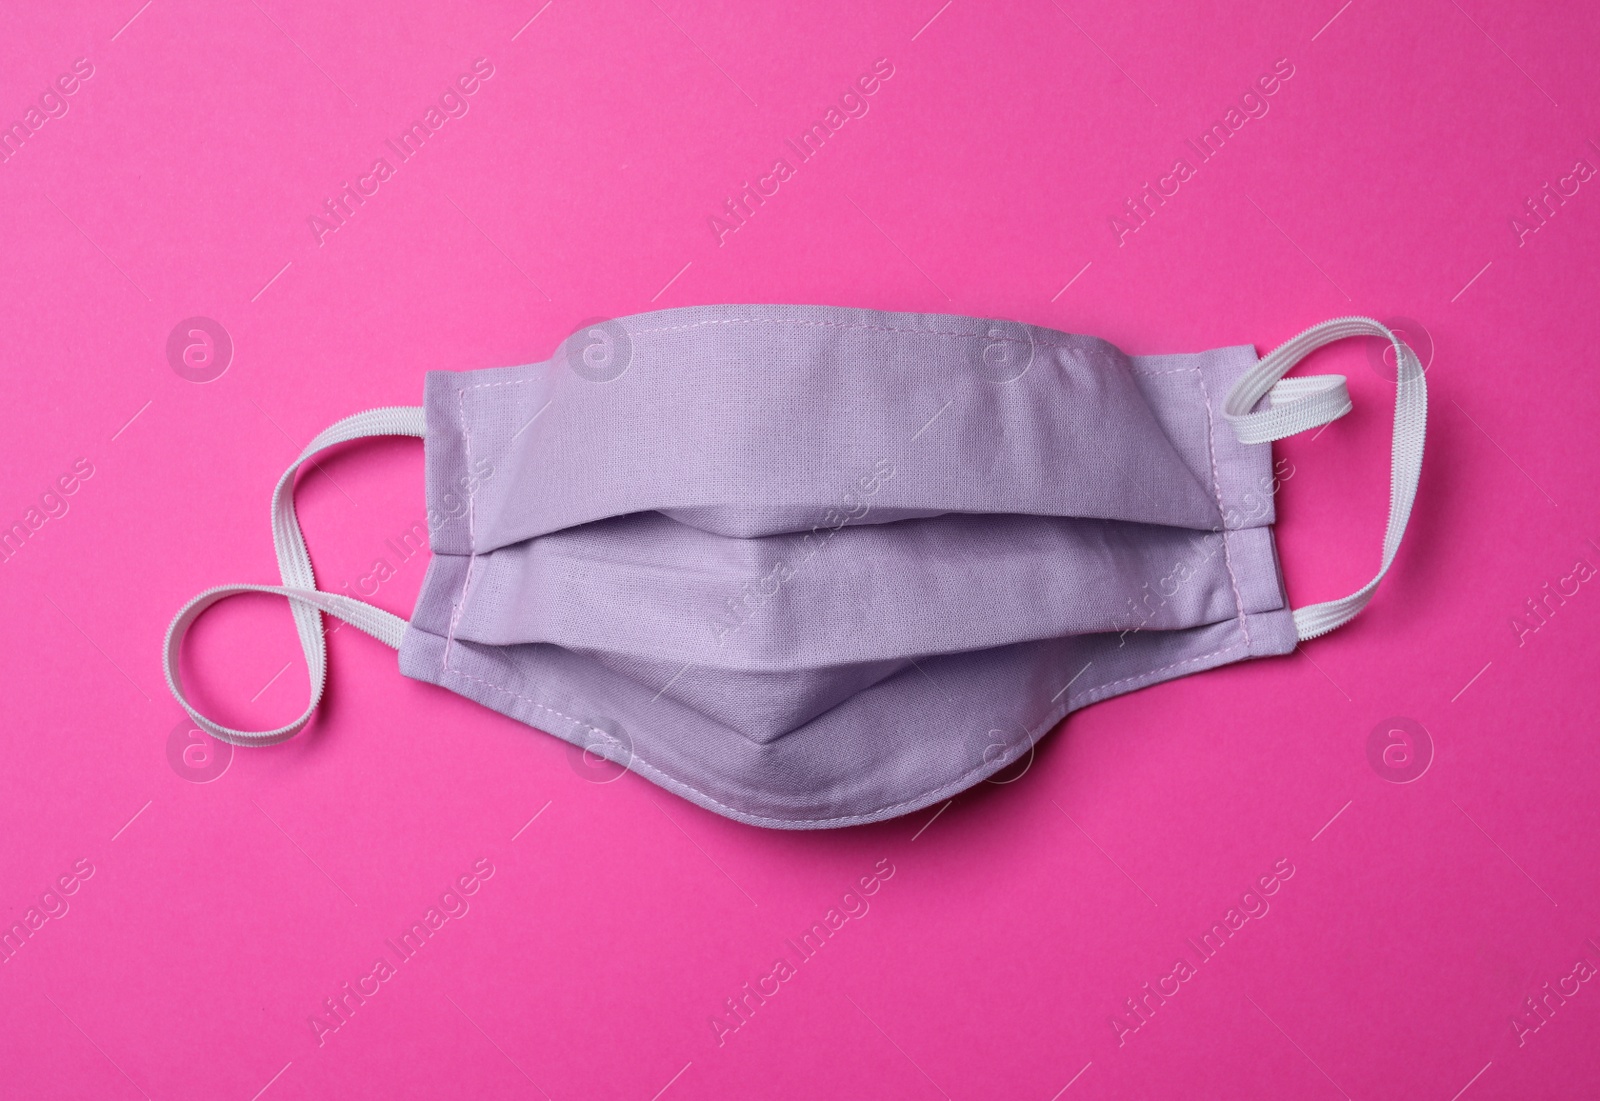 Photo of Homemade protective mask on pink background, top view. Sewing idea